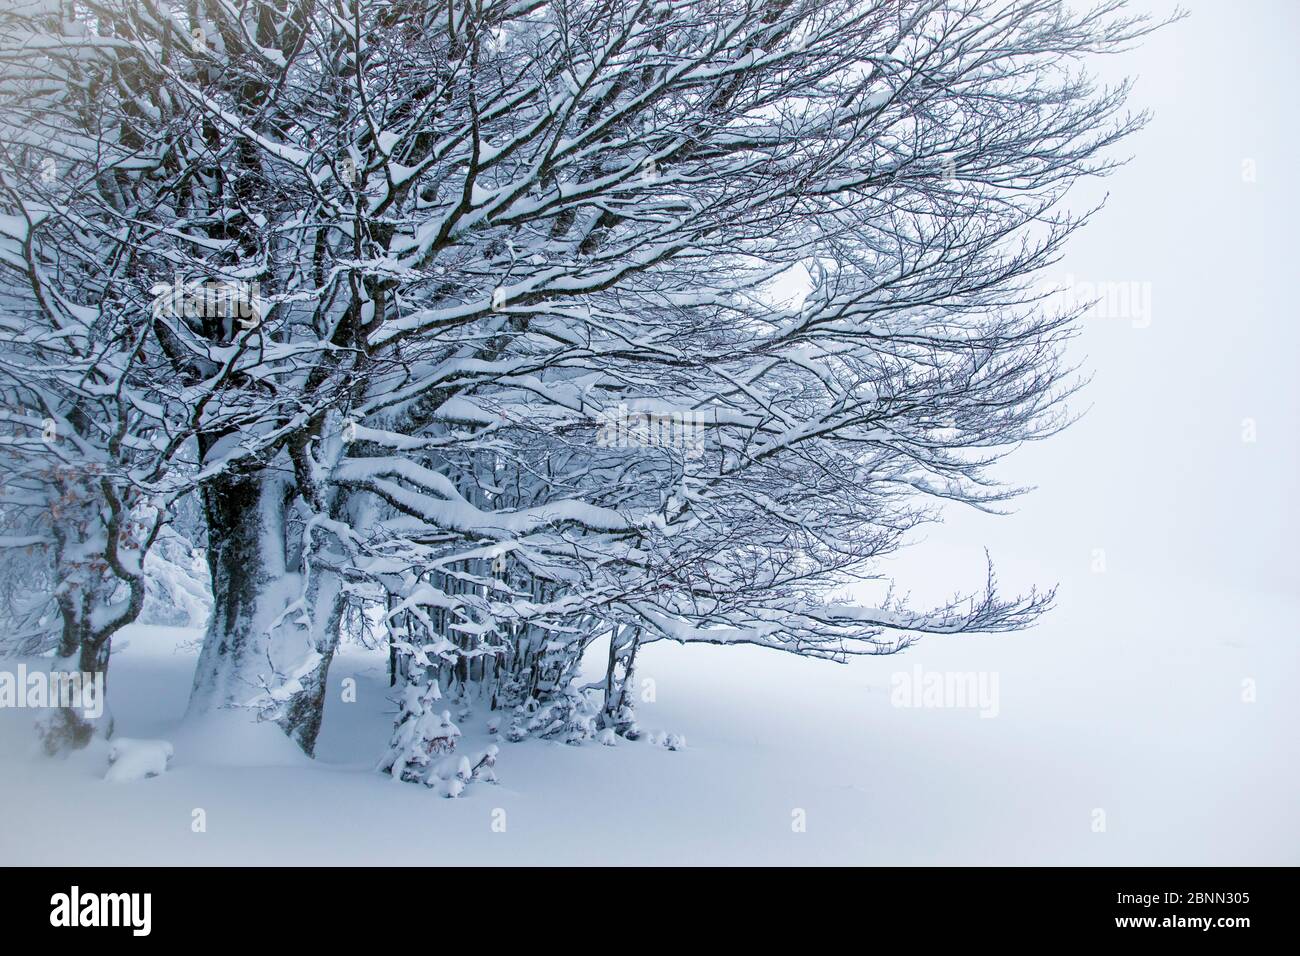 European / Common beech tree (Fagus sylvatica) trees covered in snow, Hohneck, Vosges, France, January Stock Photo